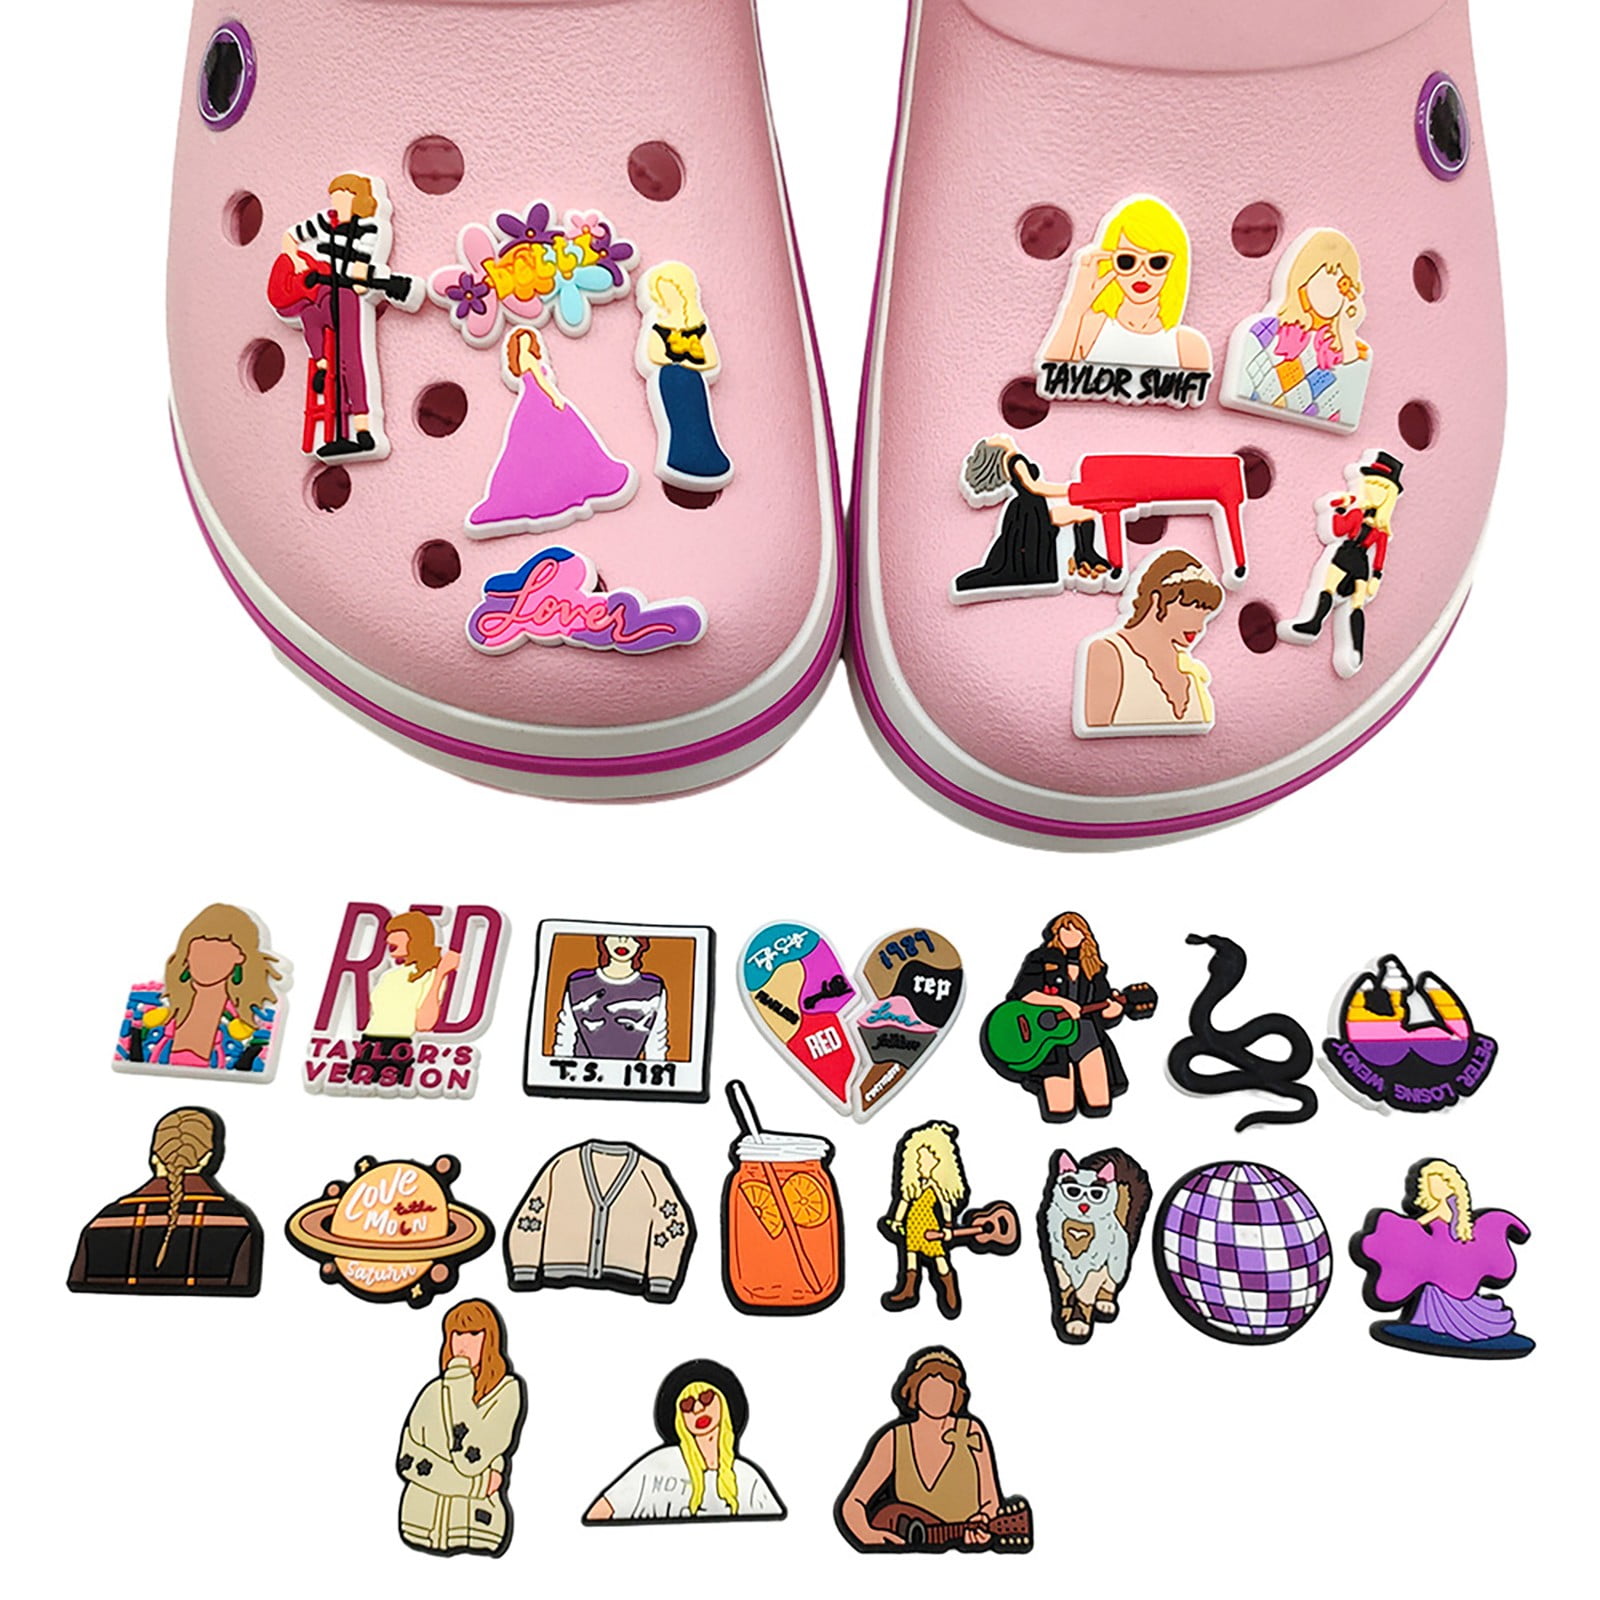 Taylor Swift Croc Charms, 29 Pcs Croc Charm TS Fits Any Shoes with Holes  Best Gift for Fans Cartoon DIY Croc Charm Party Accessories 